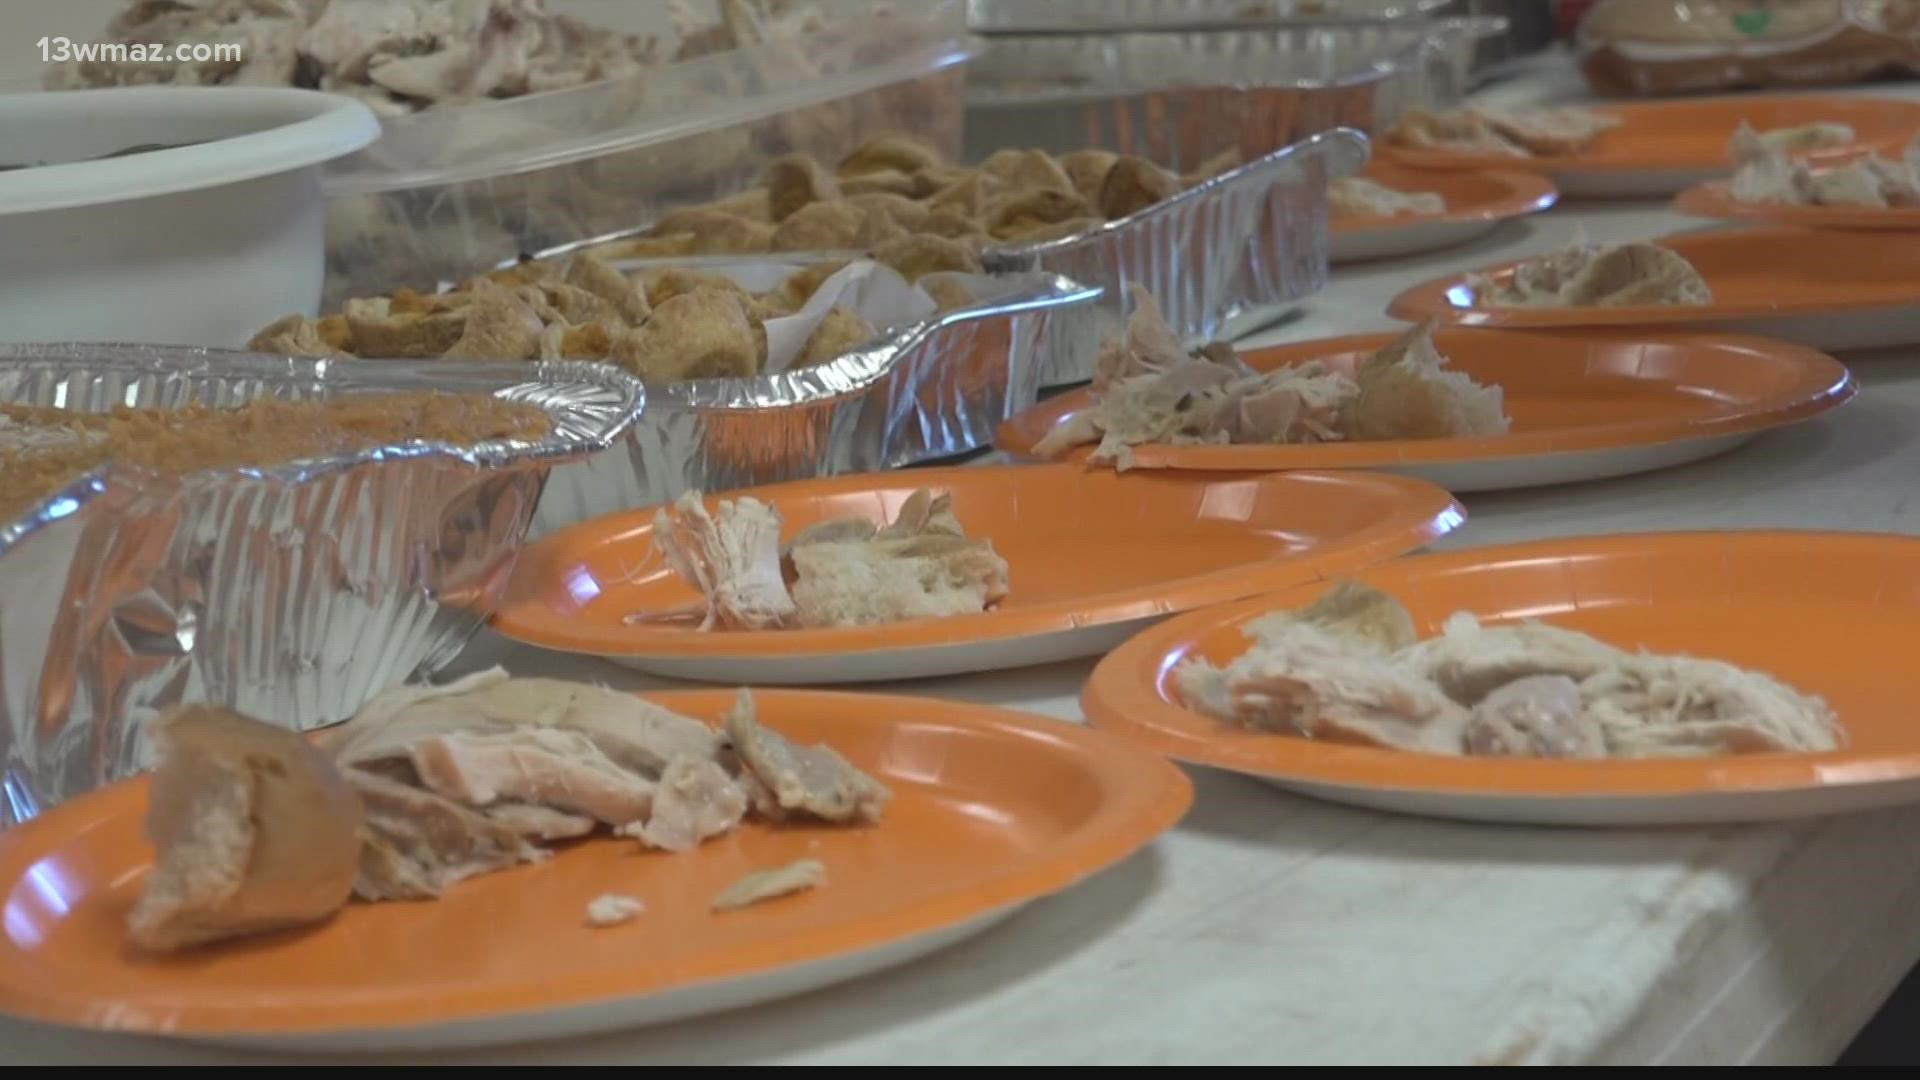 Warner Robins Animal Control employees and volunteers put together a Turkey Day feast for animals in their care Tuesday.